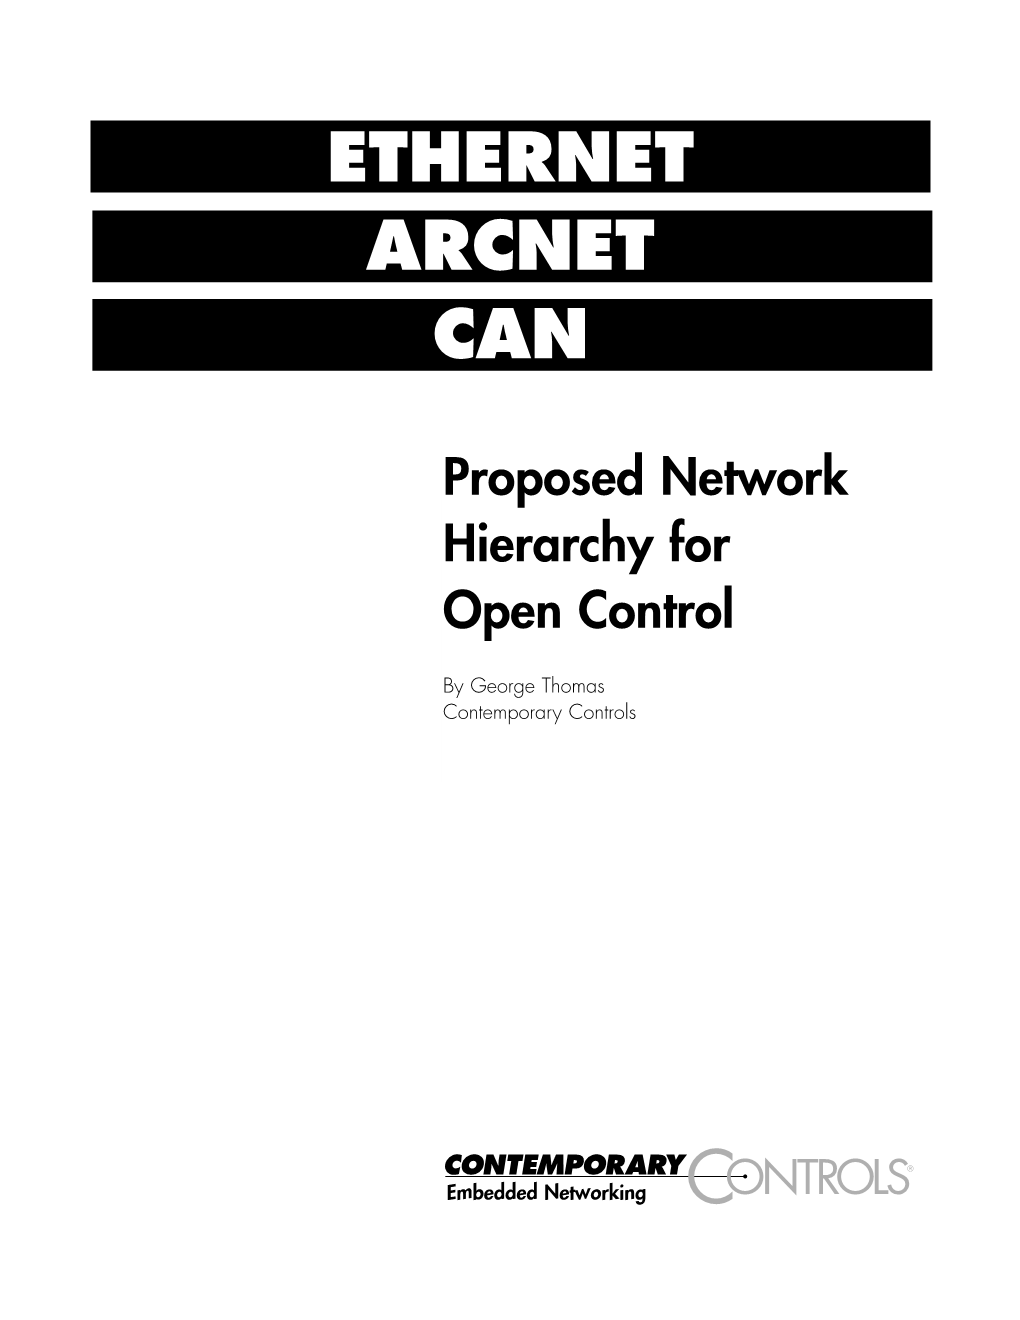 Proposed Network Hierarchy for Open Control : ETHERNET